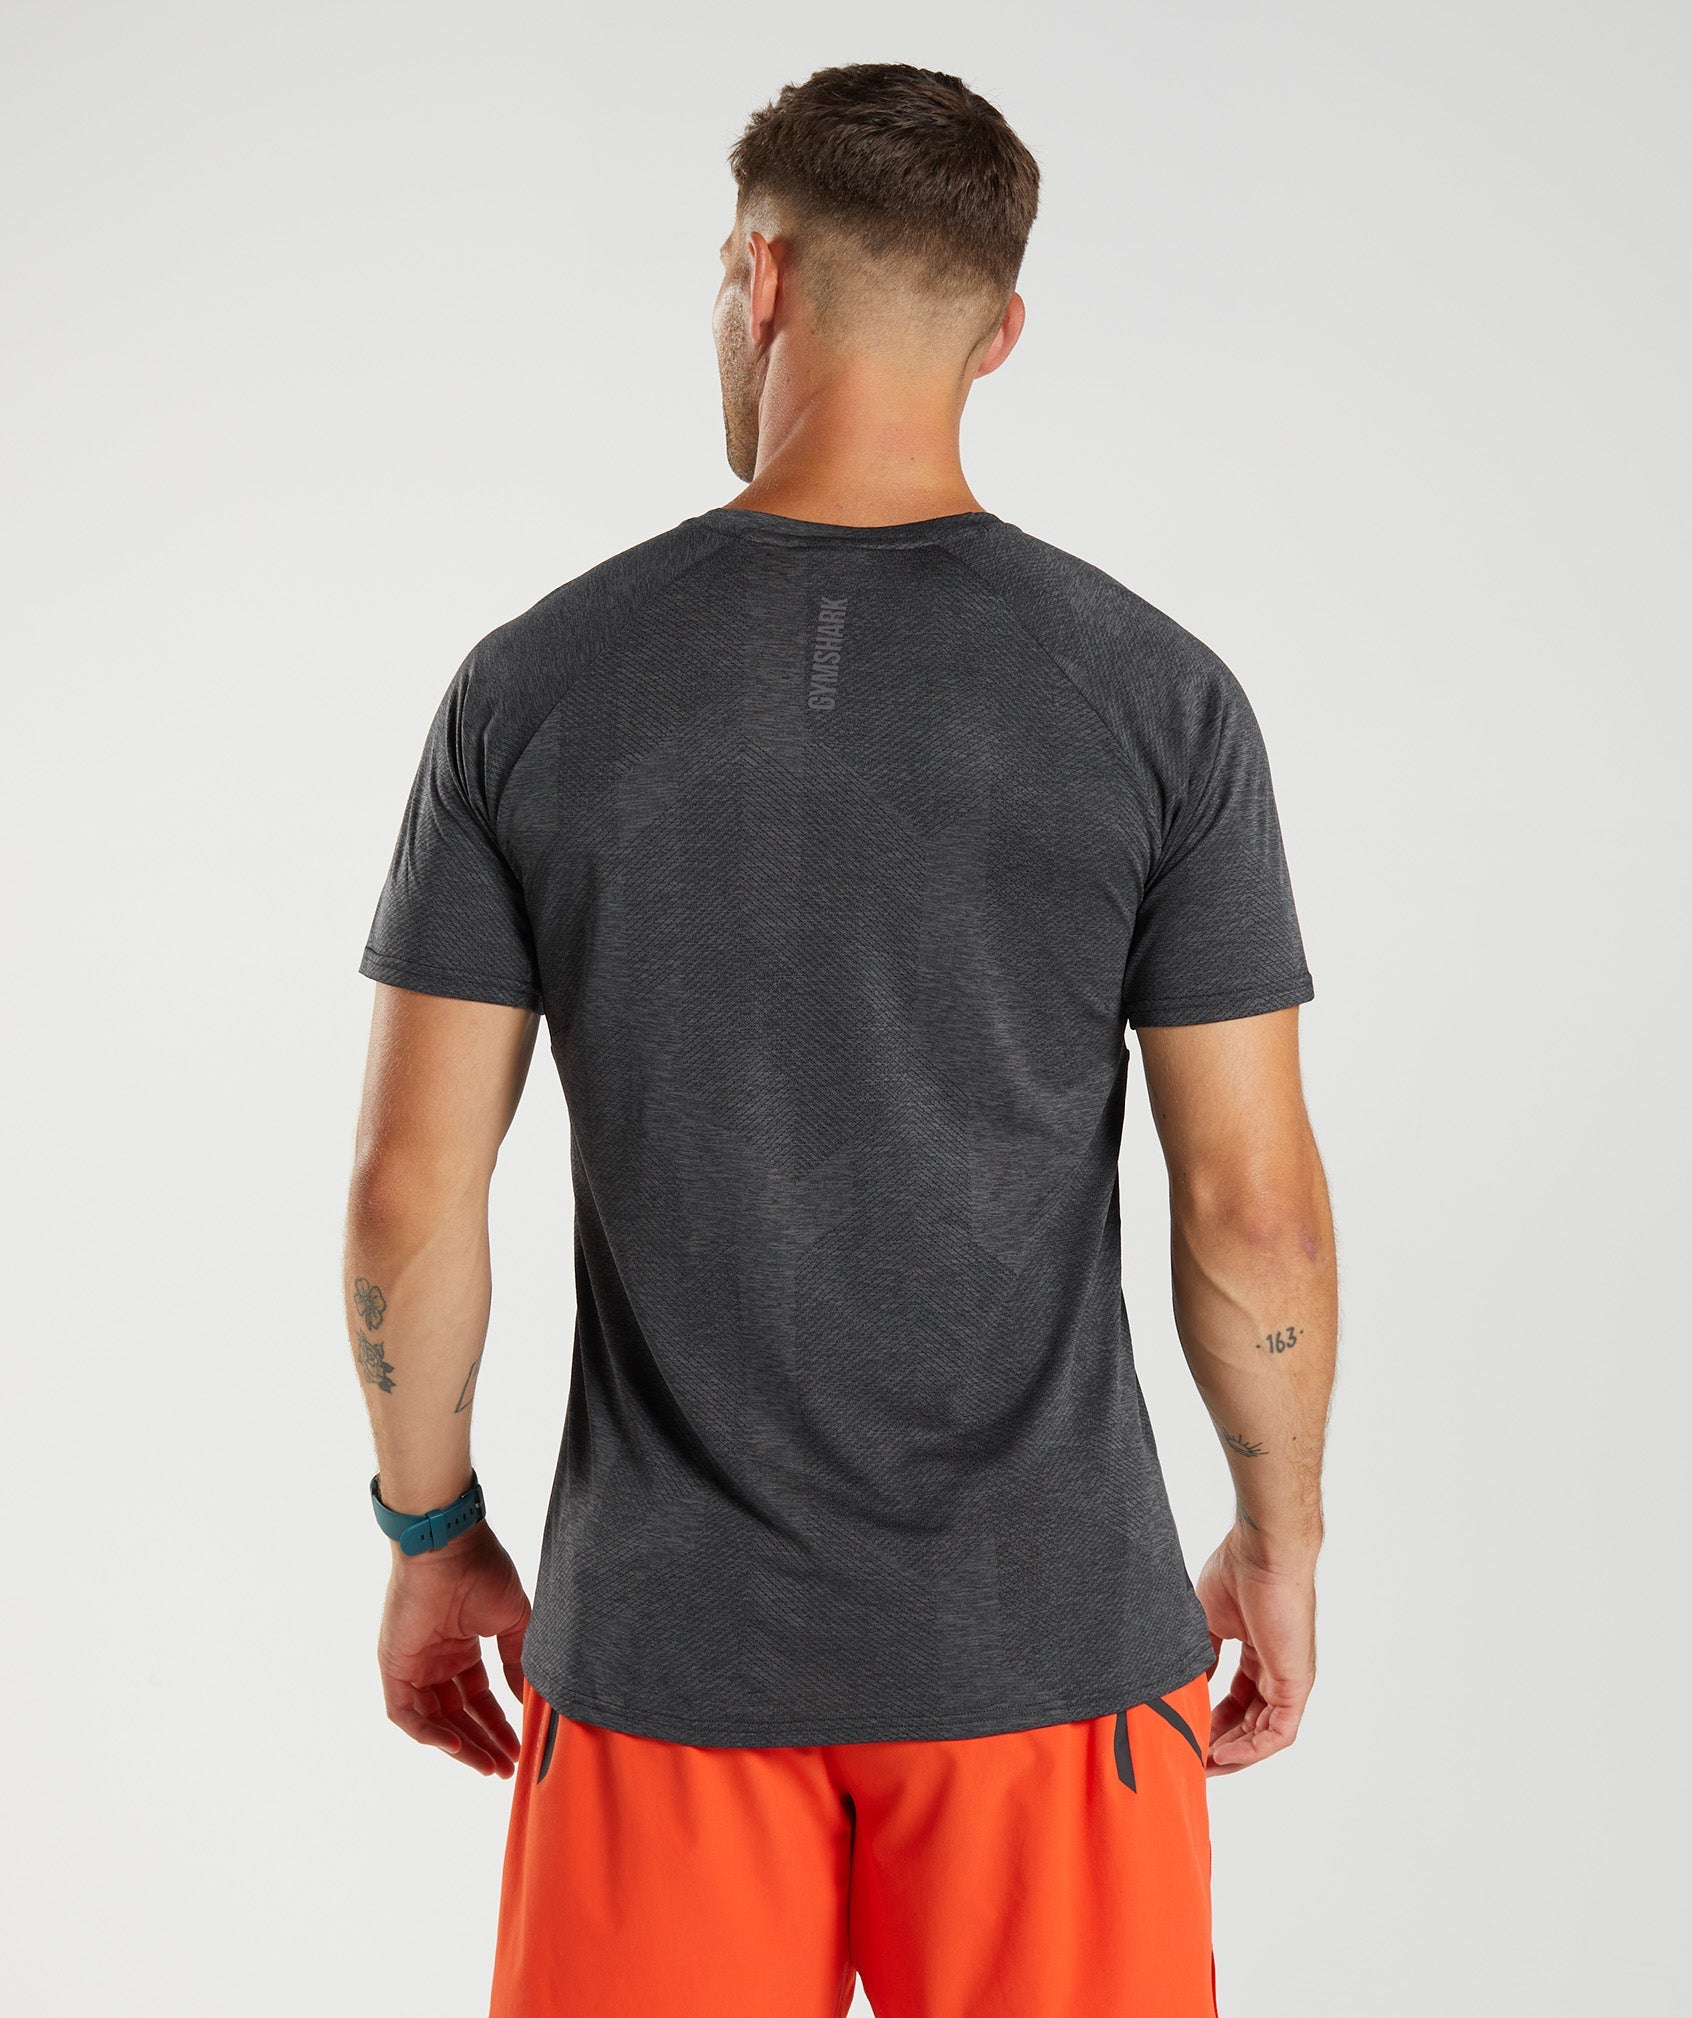 Apex T-Shirt in Black/Silhouette Grey - view 2